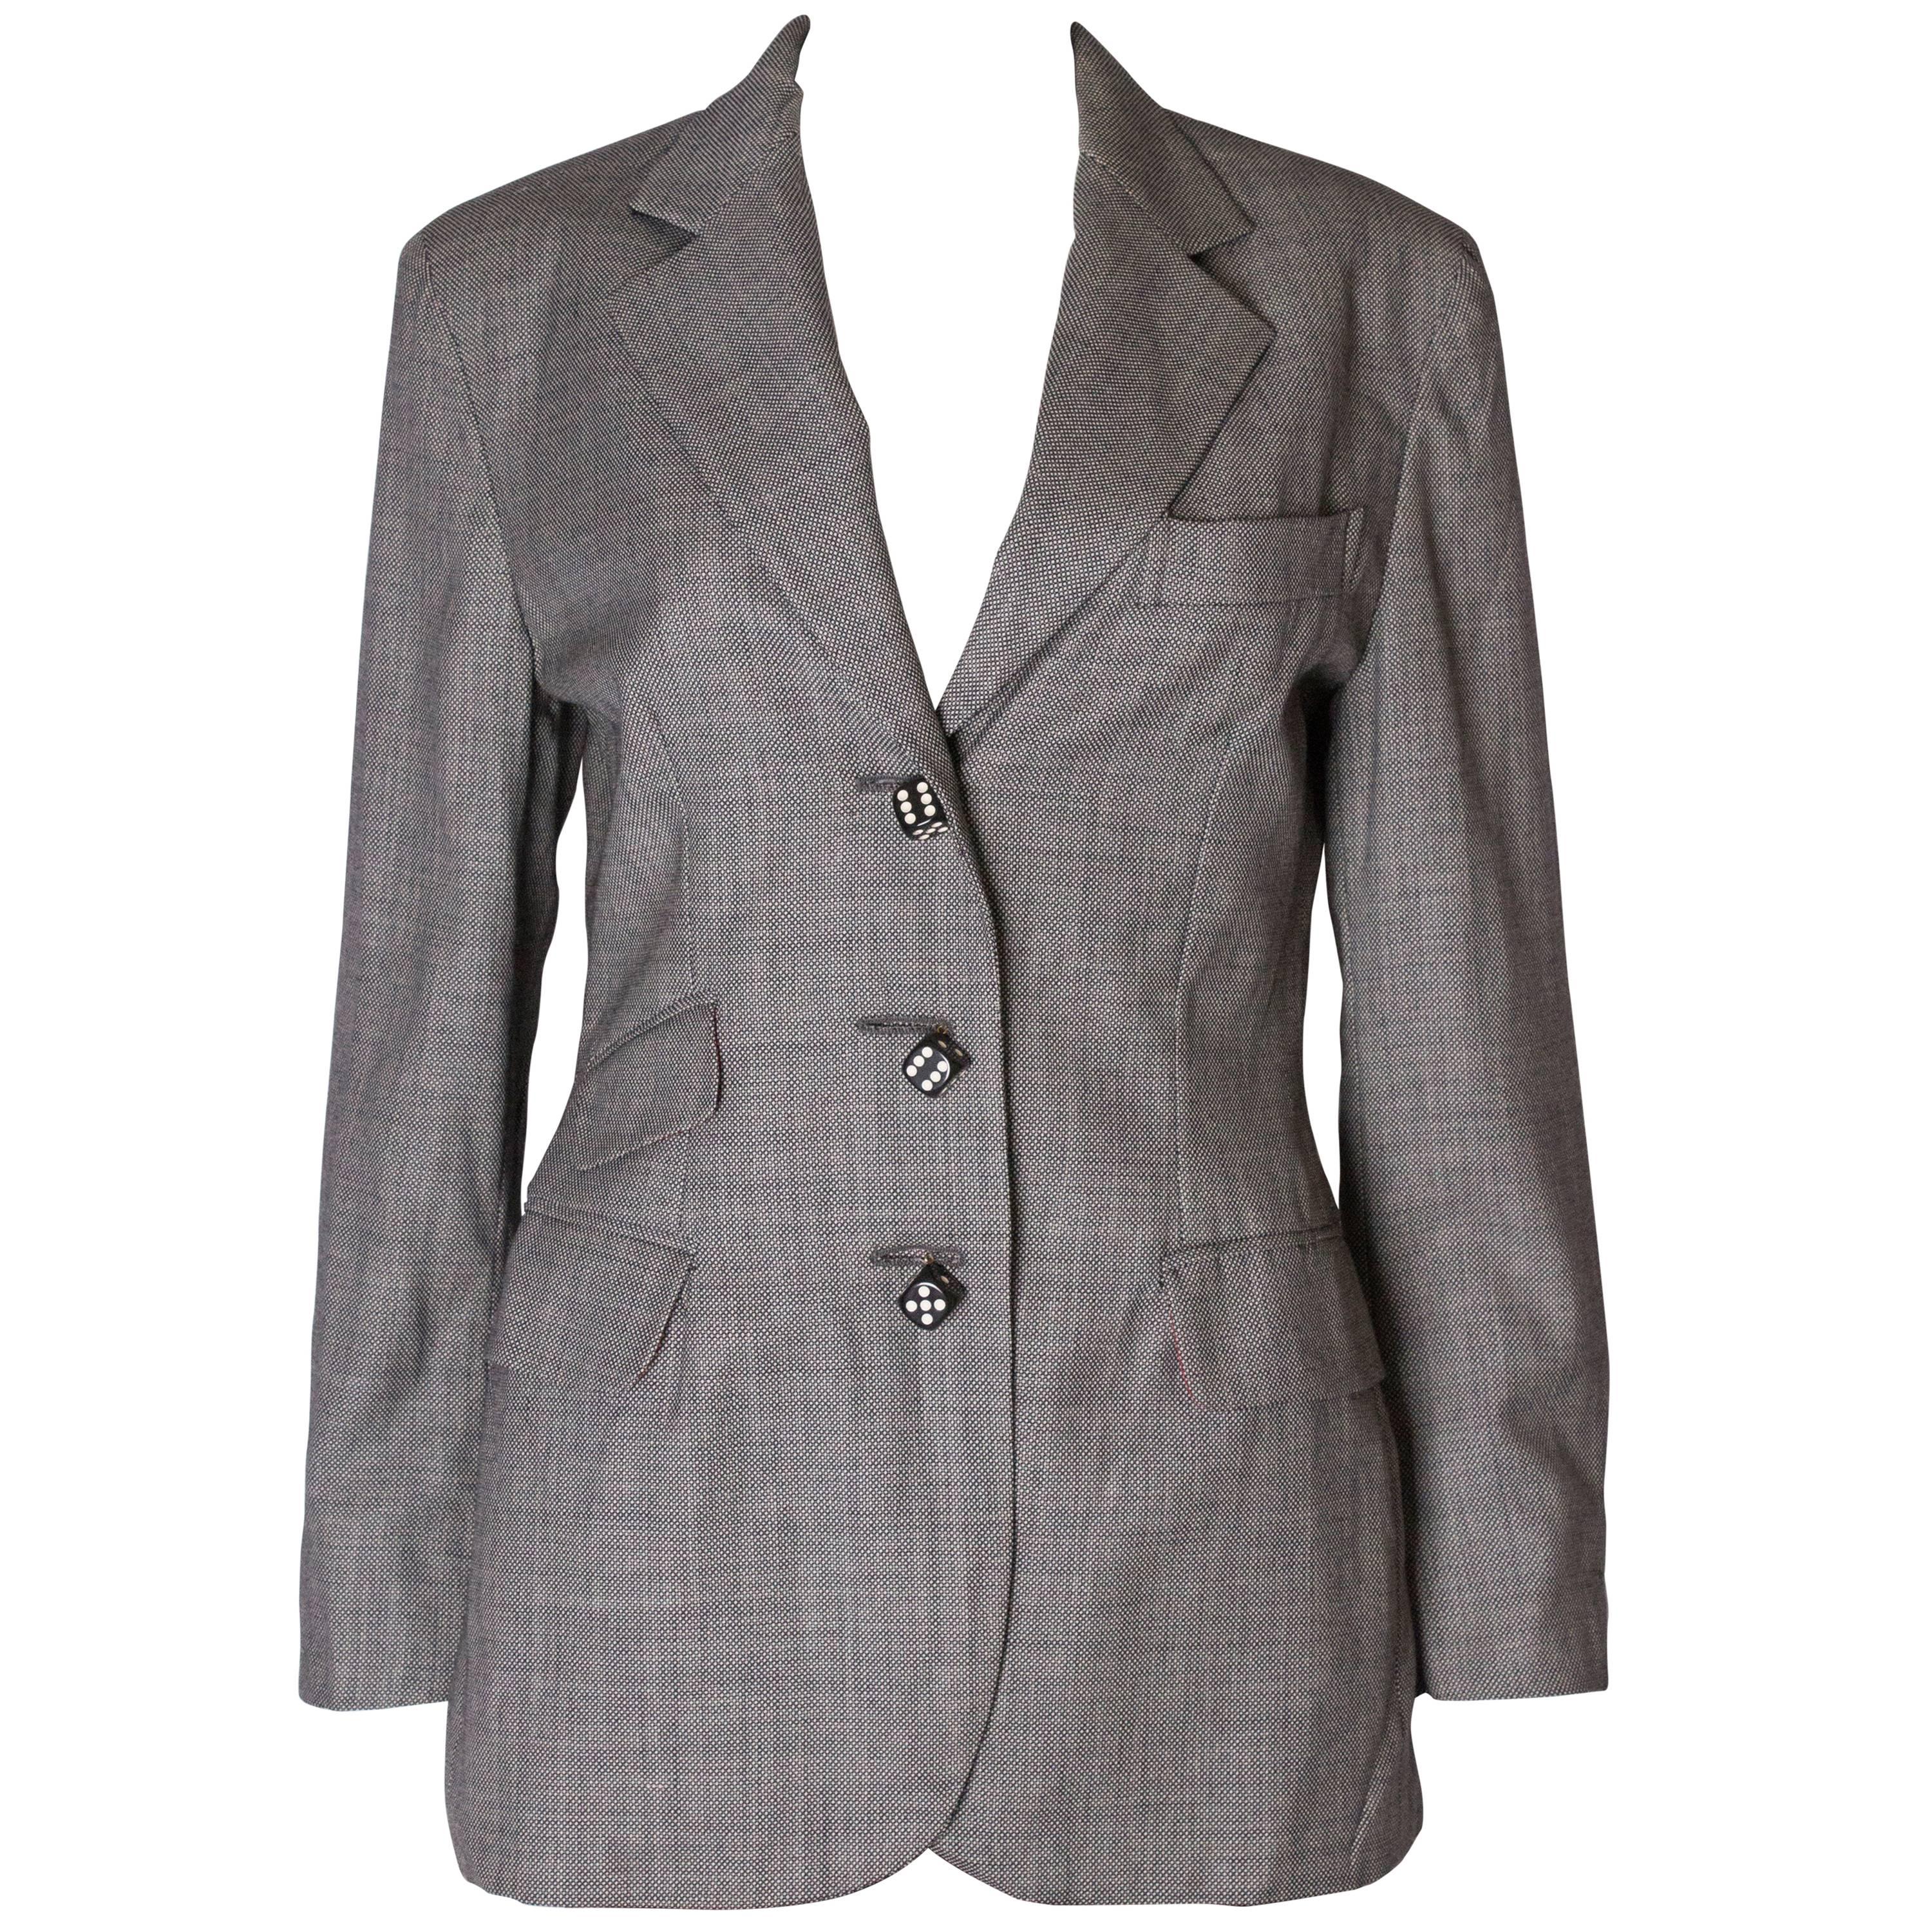 A Vintage 1990s grey button up dice button detail jacket by Moschino Couture  For Sale